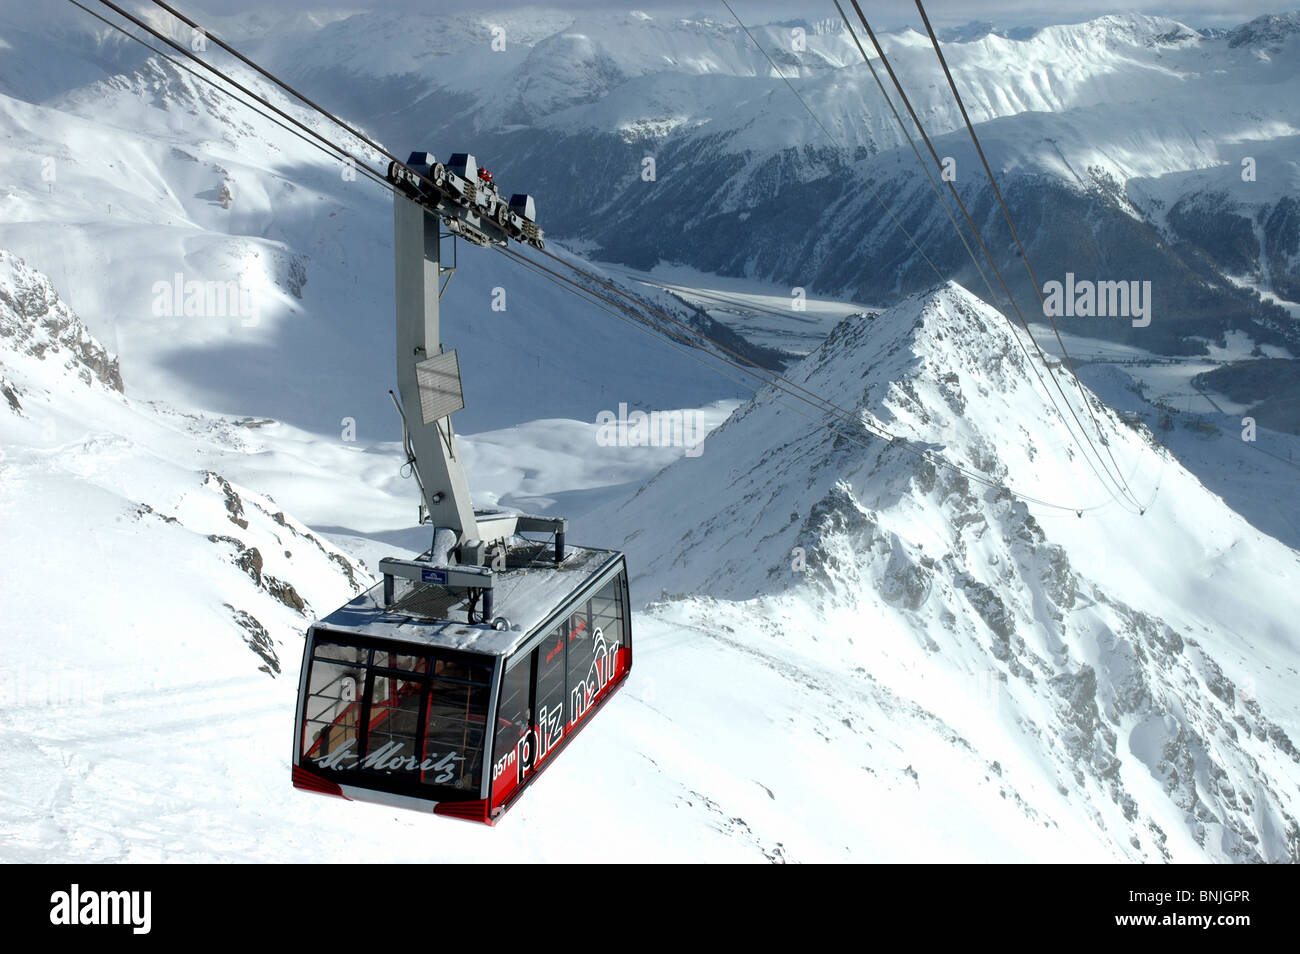 gondola-cable-car-aerial-tramway-ropeway-cablecar-alps-alpine-mountain-BNJGPR.jpg